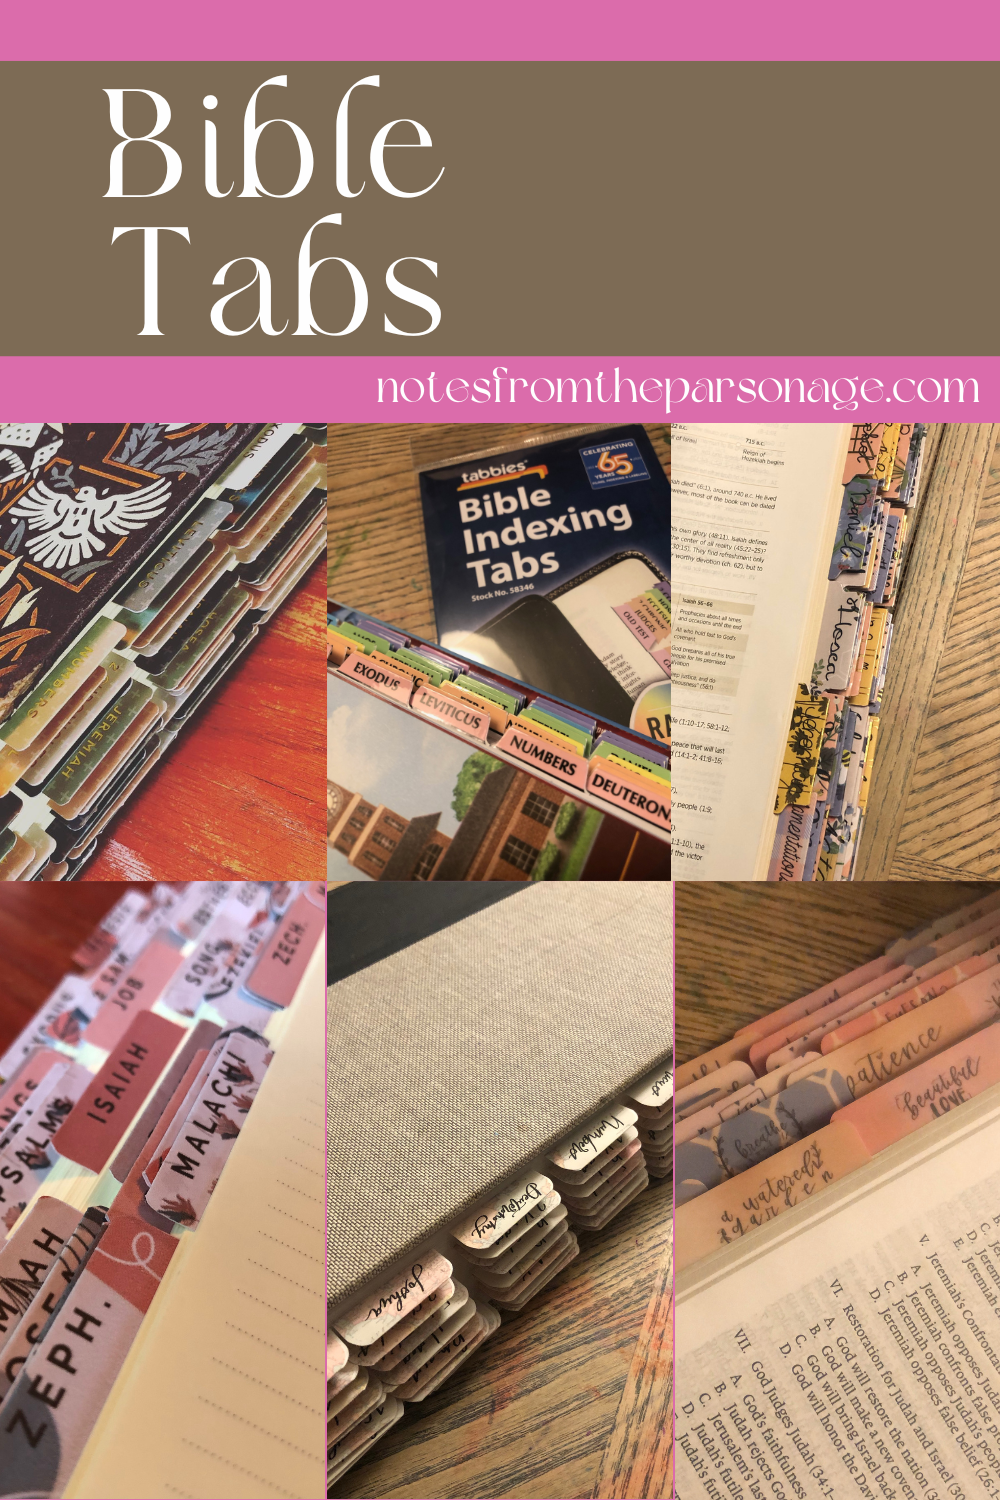 Image collage of several different Bible tabs with the title "Bible Tabs"